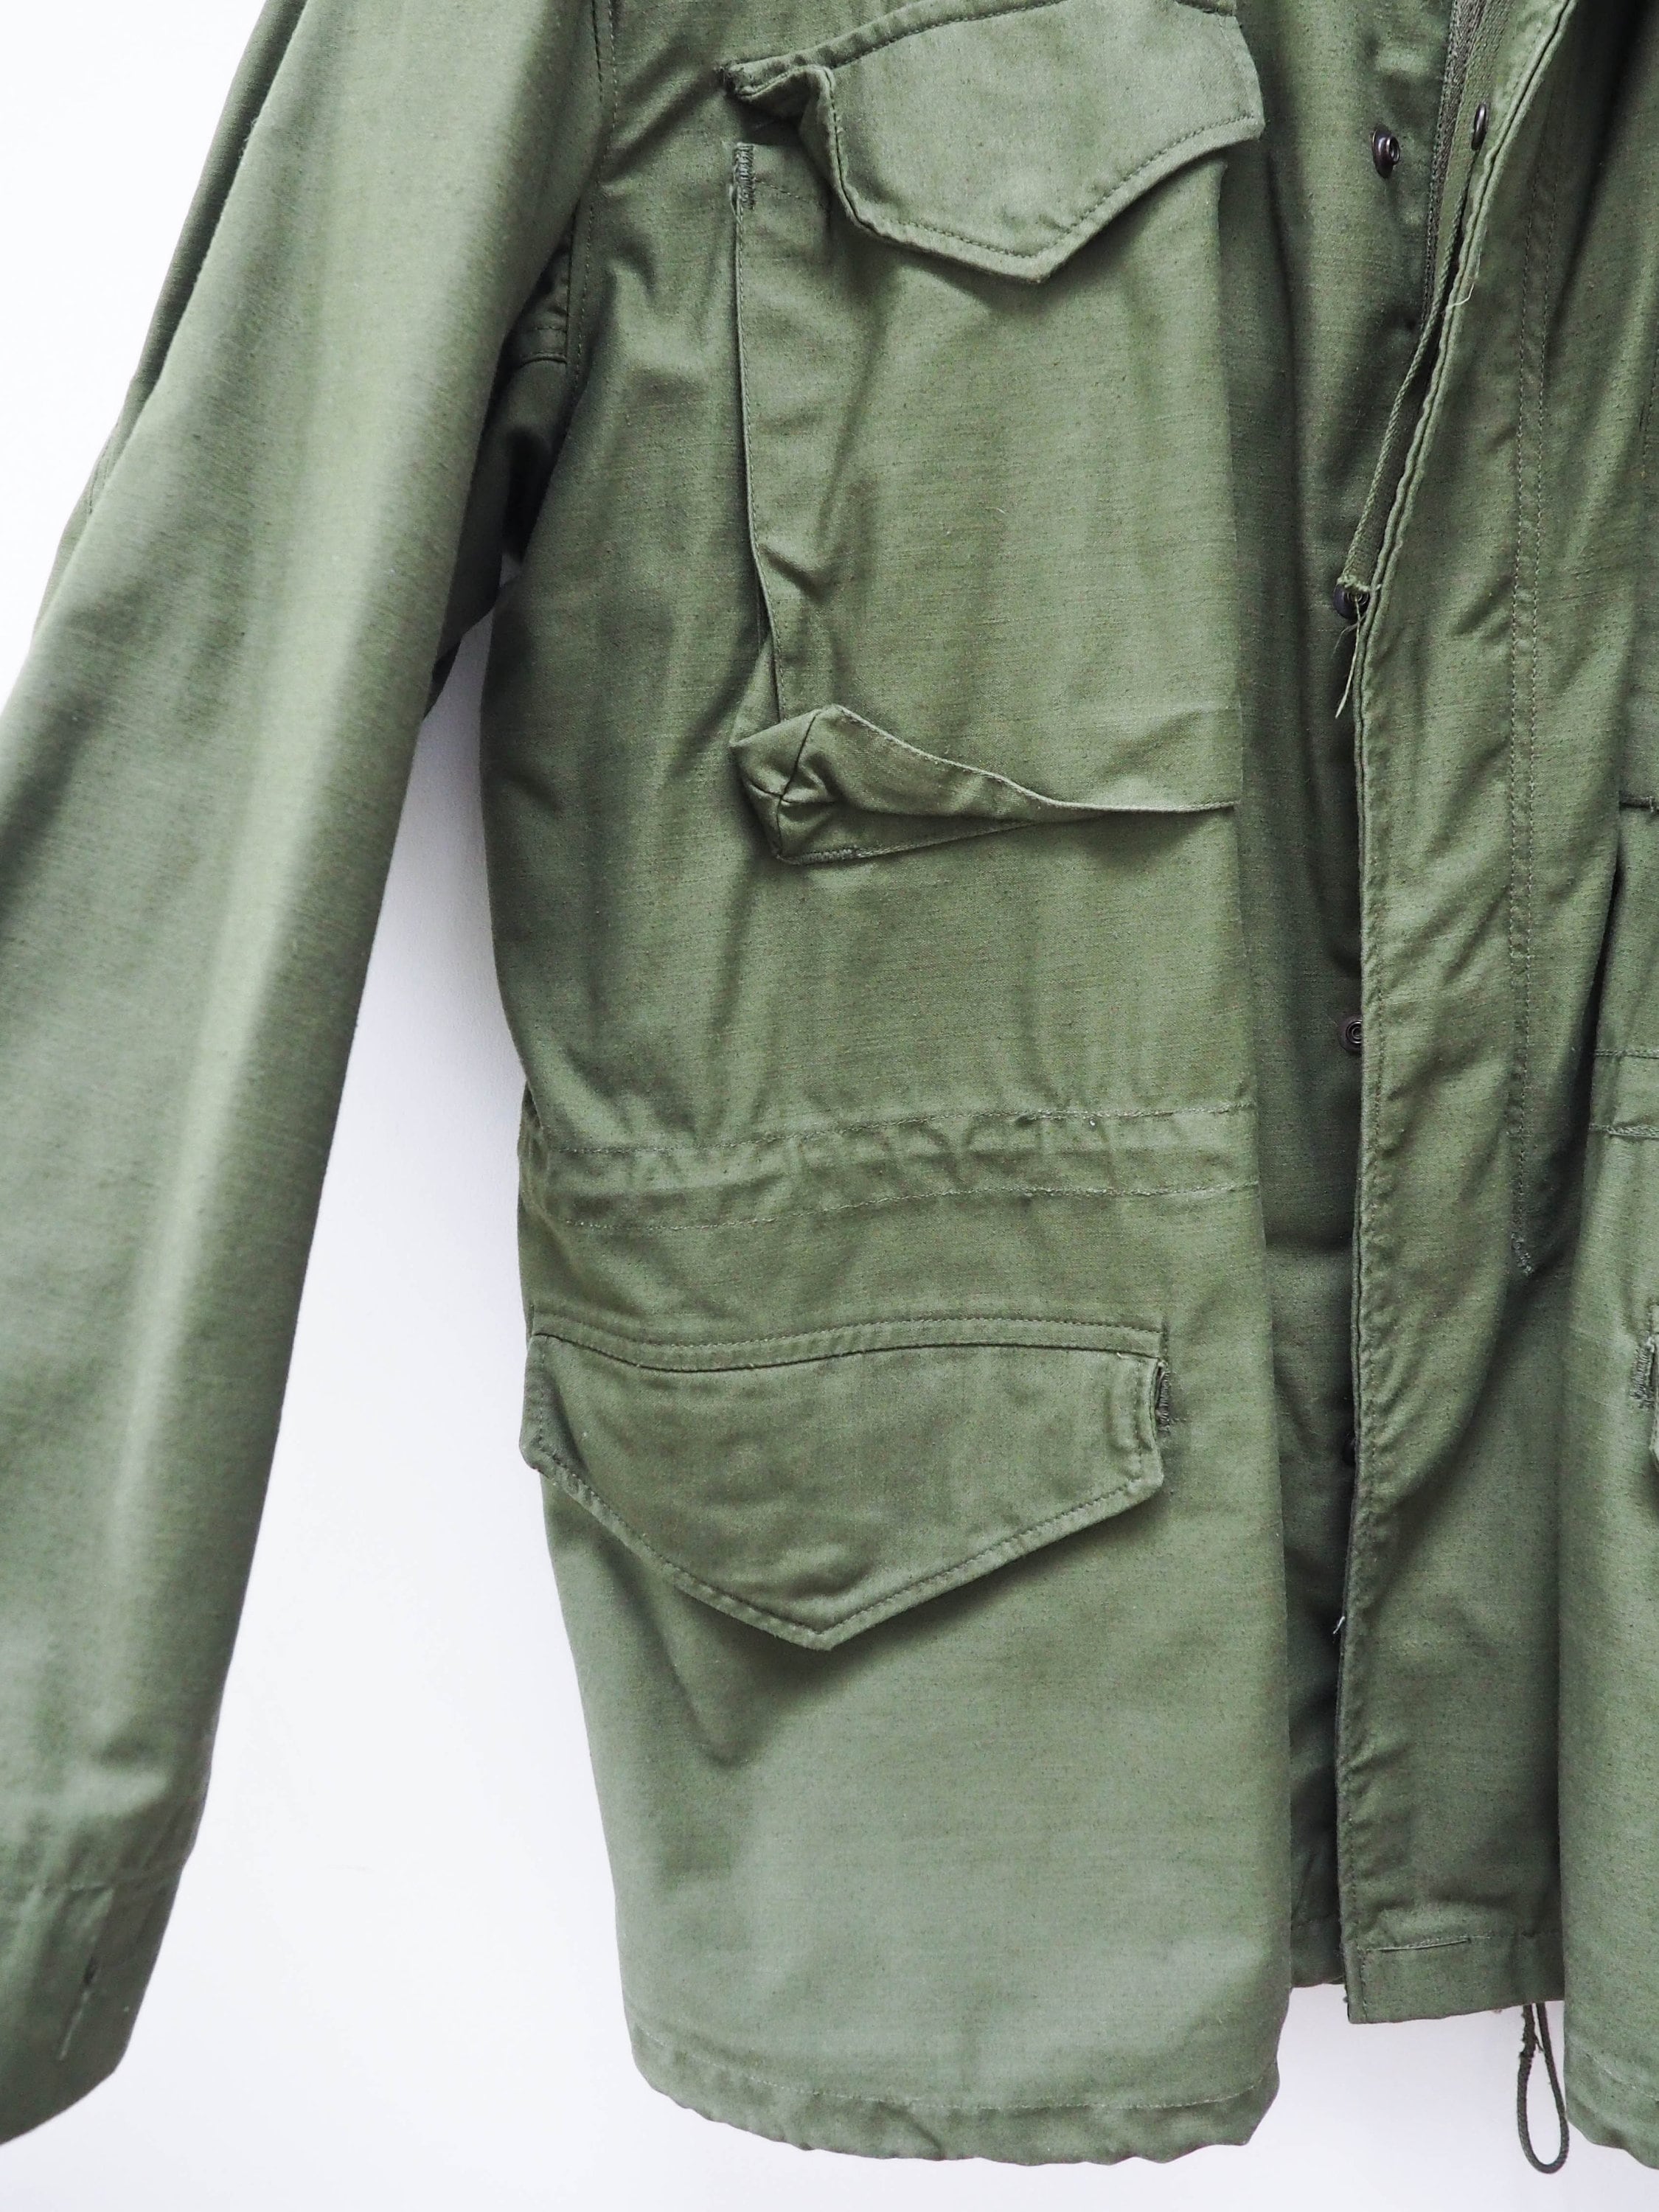 Olive Green Military Field Coat Green Army Jacket Grunge - Etsy